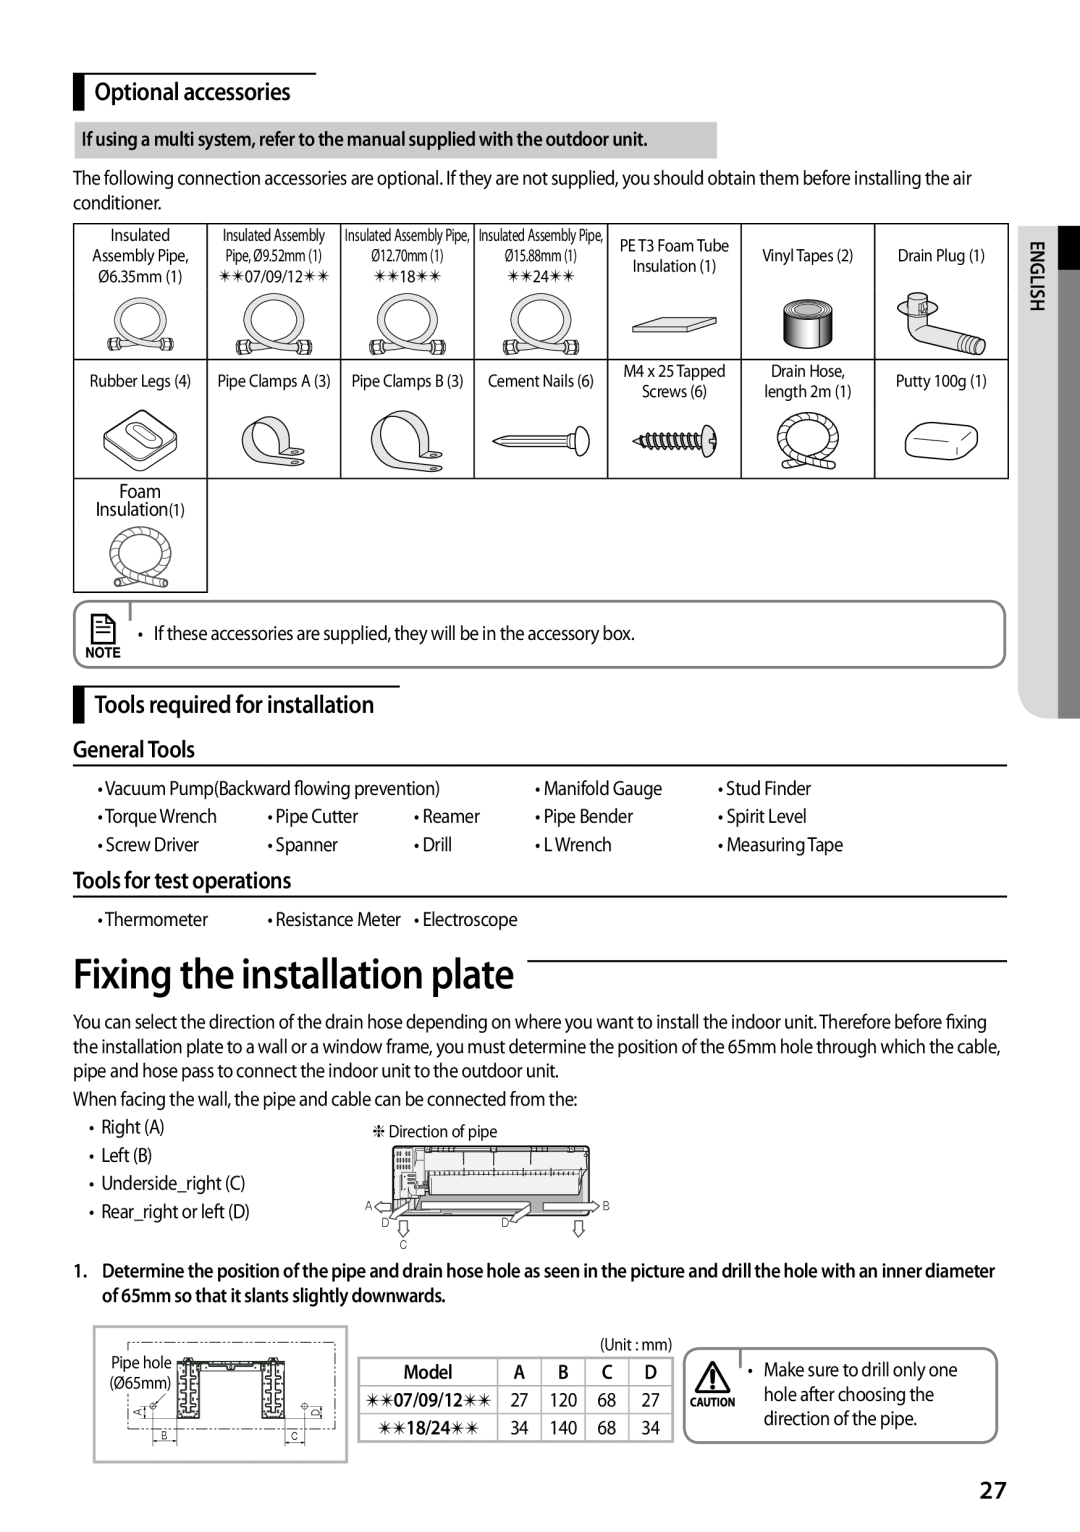 Samsung AQV09PSAX manual Fixing the installation plate, Optional accessories, Tools required for installation General Tools 